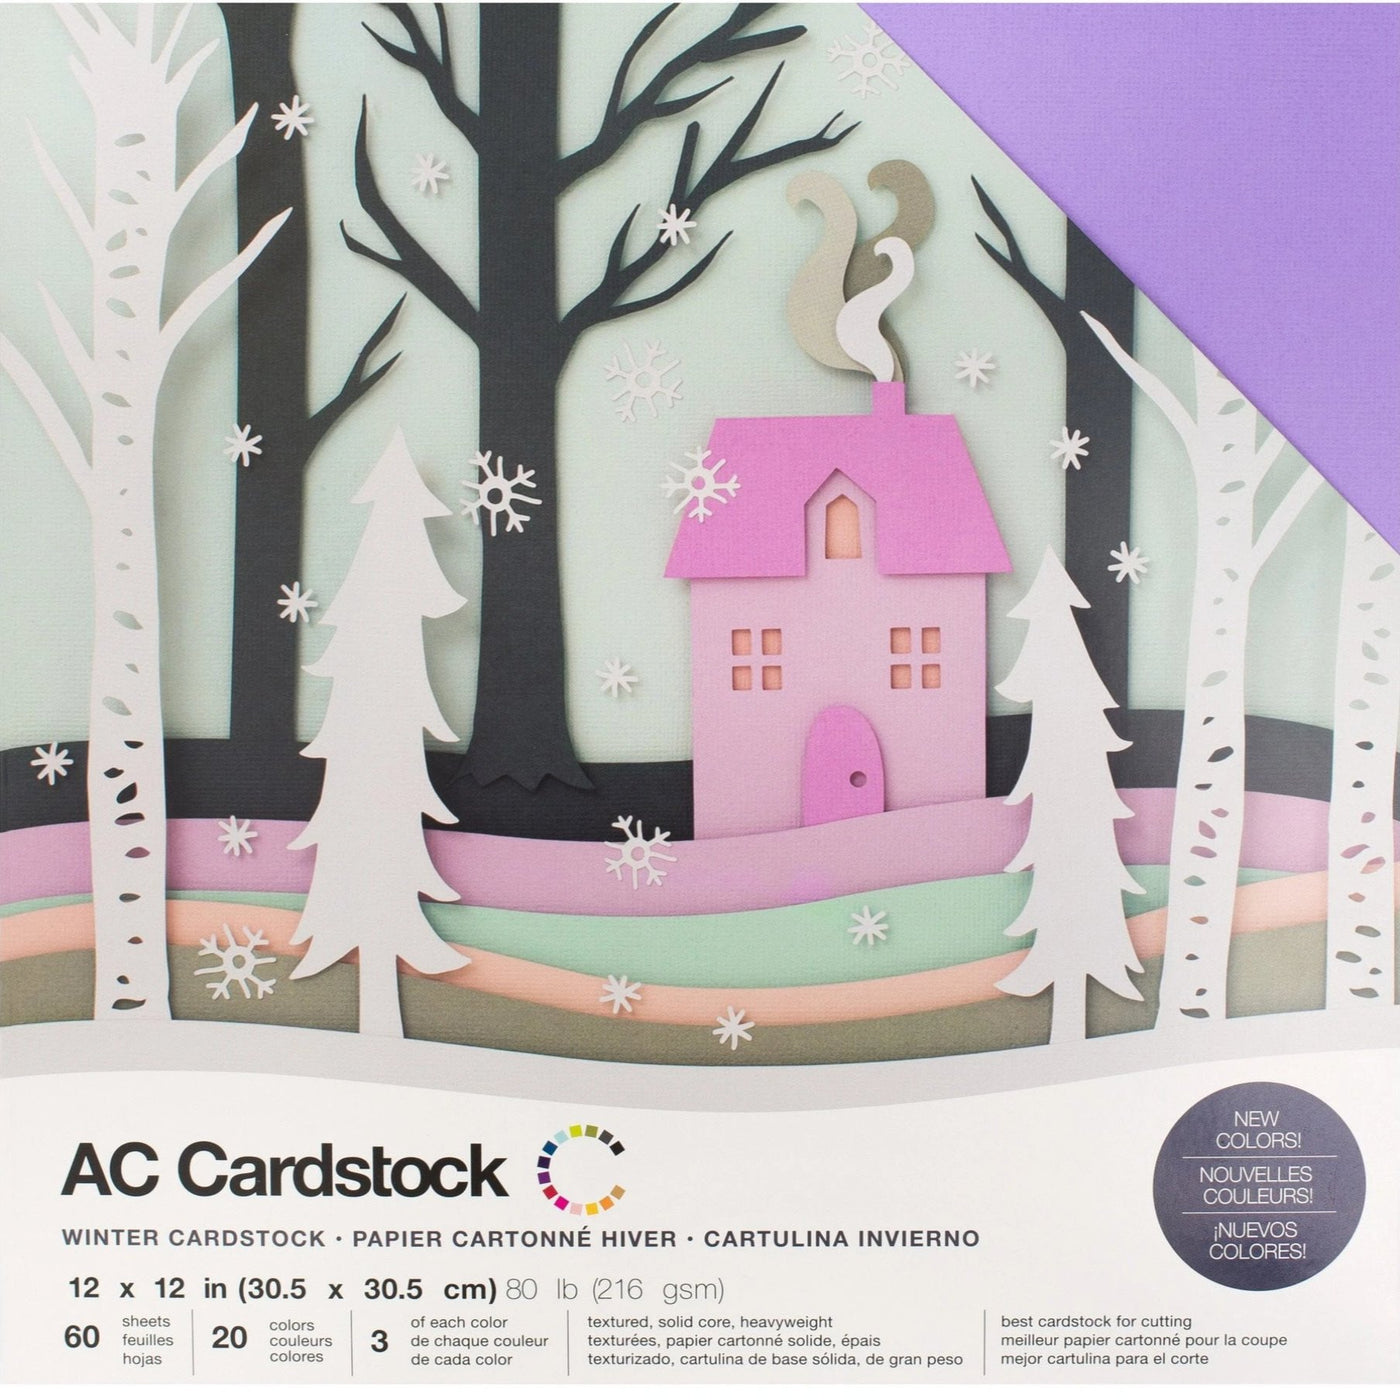 WINTER - cardstock variety pack - 60 ct - 12x12 inch - 80 lb - textured scrapbook paper - American Crafts